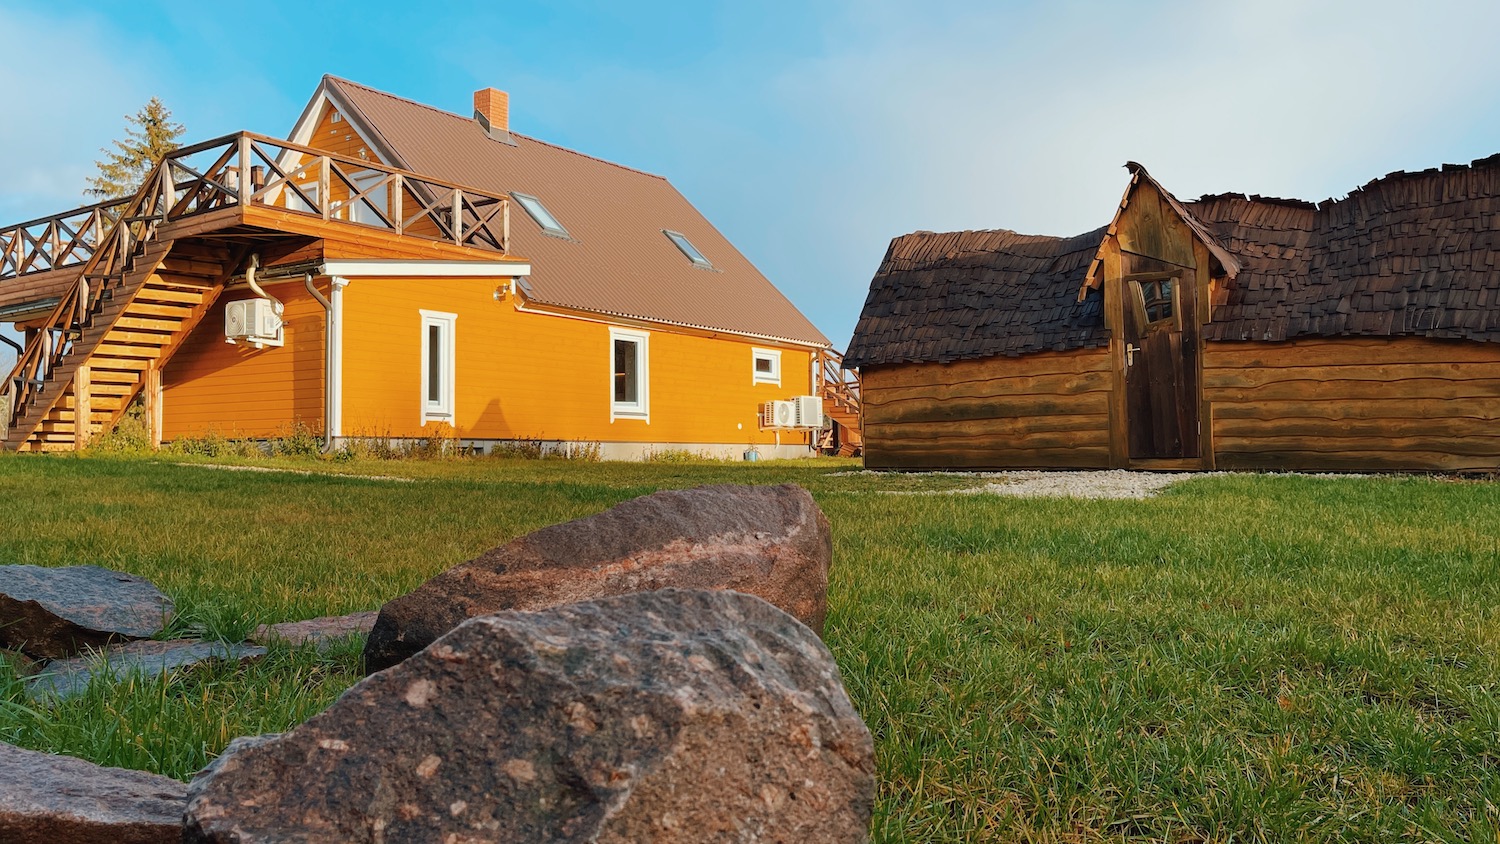 Best Estonian vacation houses in Estonia with a sauna and hot tub, Pihlaka hunting cabin, Eesti Paigad